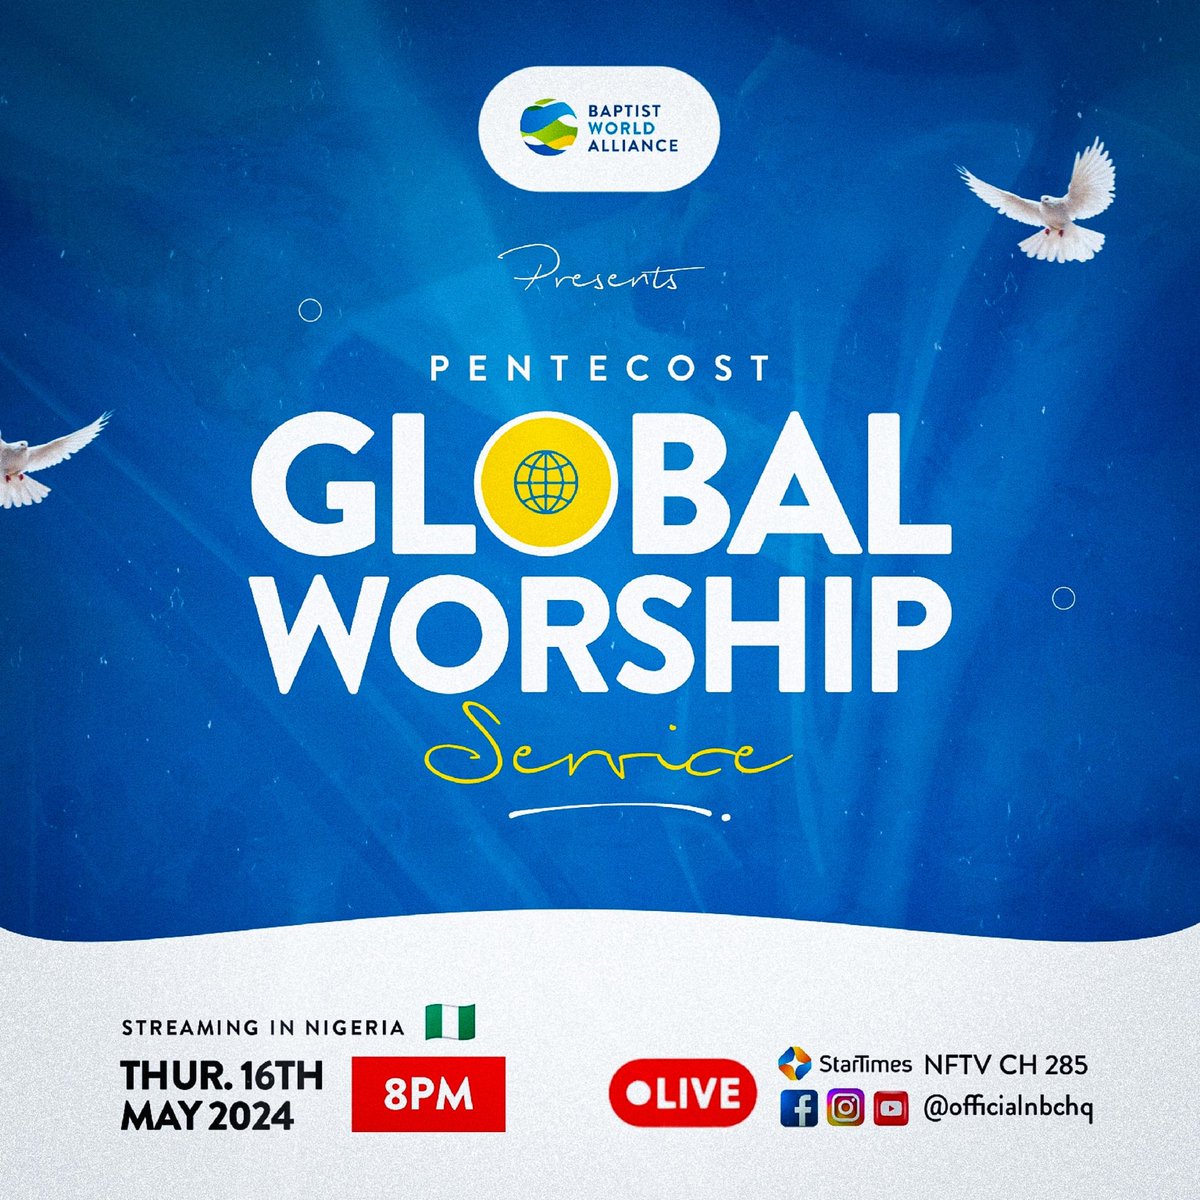 Dear Nigerian Baptist Family, You are warmly invited to join the Global Baptist Family for the 2024 GLOBAL PENTECOST SERVICE. The event will be streamed on New Frontiers TV Channel 285 on Startimes and all NBC social media platforms on Thursday, May 16, 2024, at 8:00 p.m.